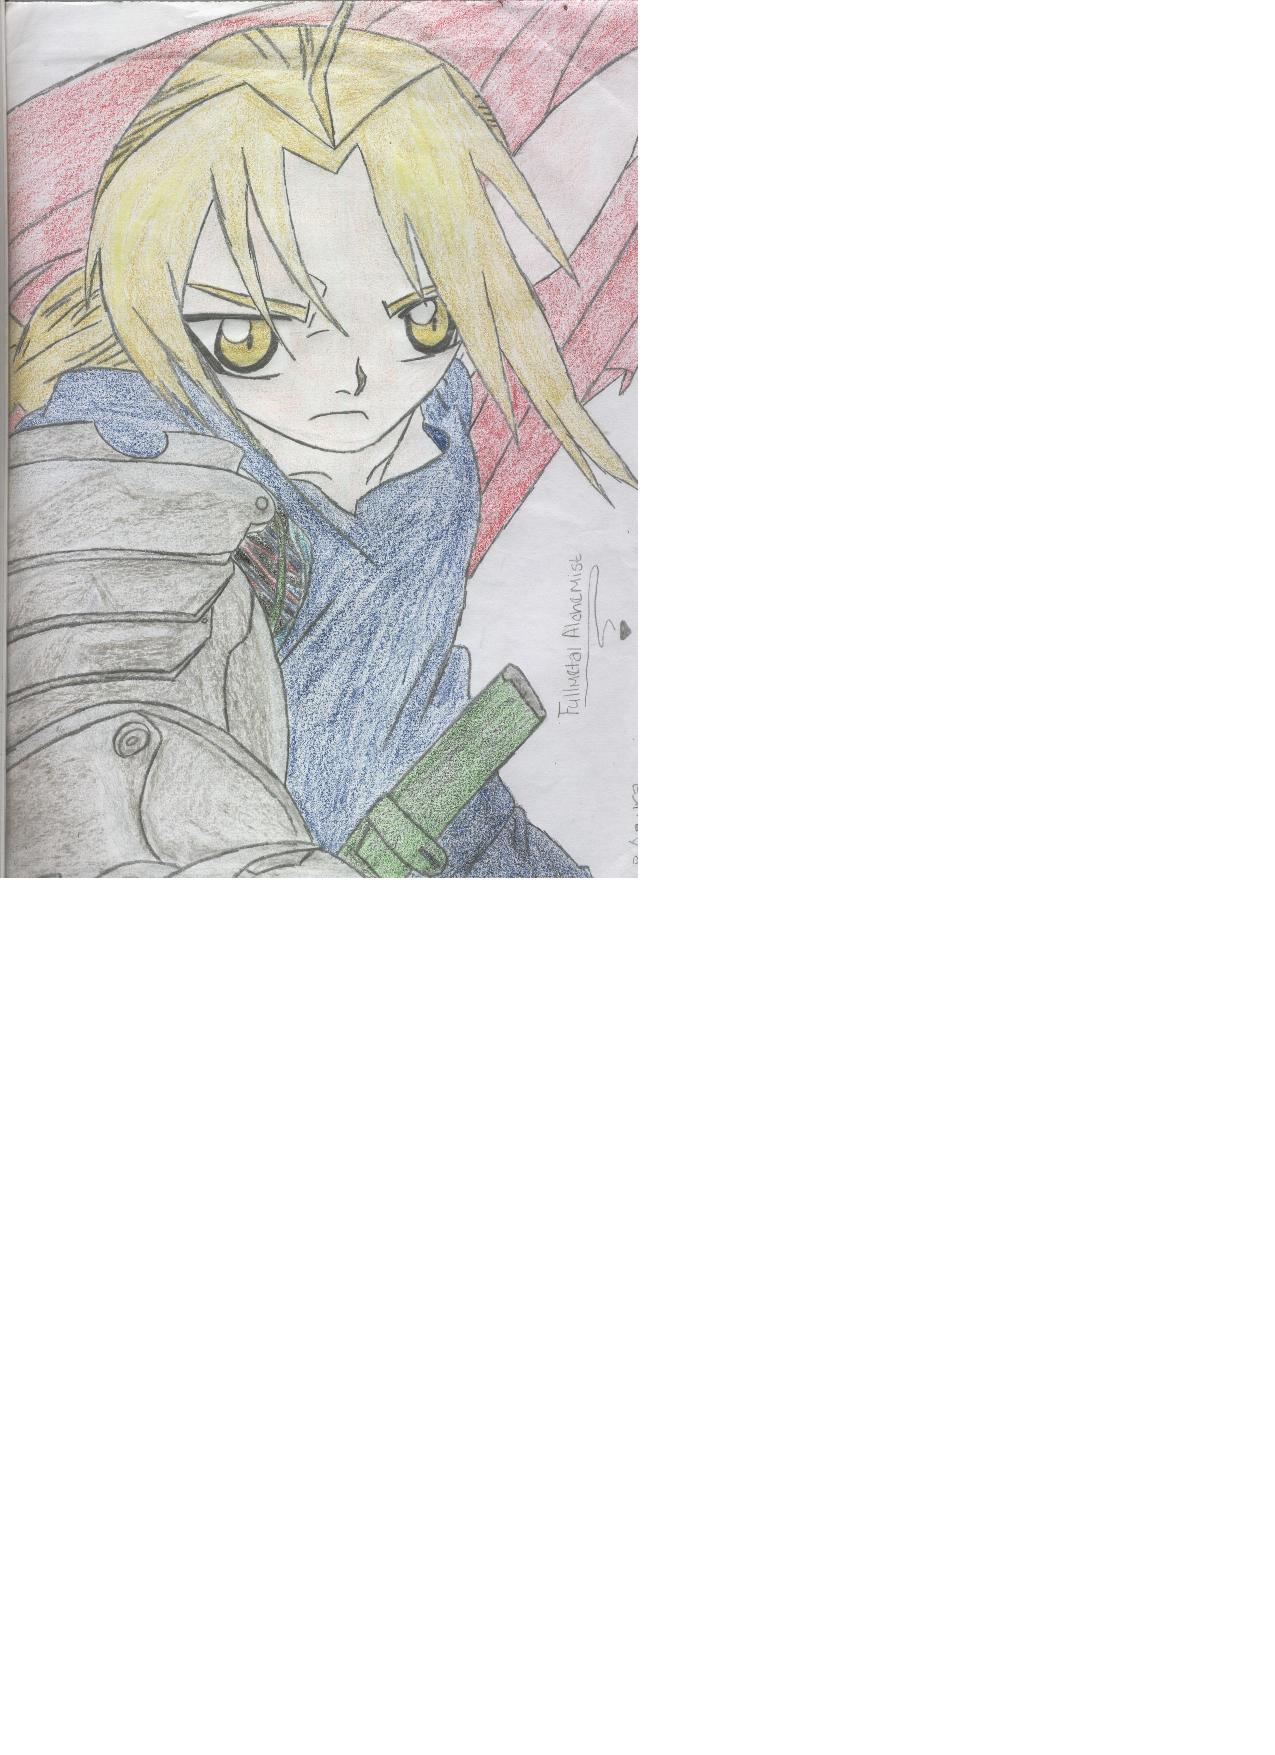 Ed Elric by Hiro_The_Ram